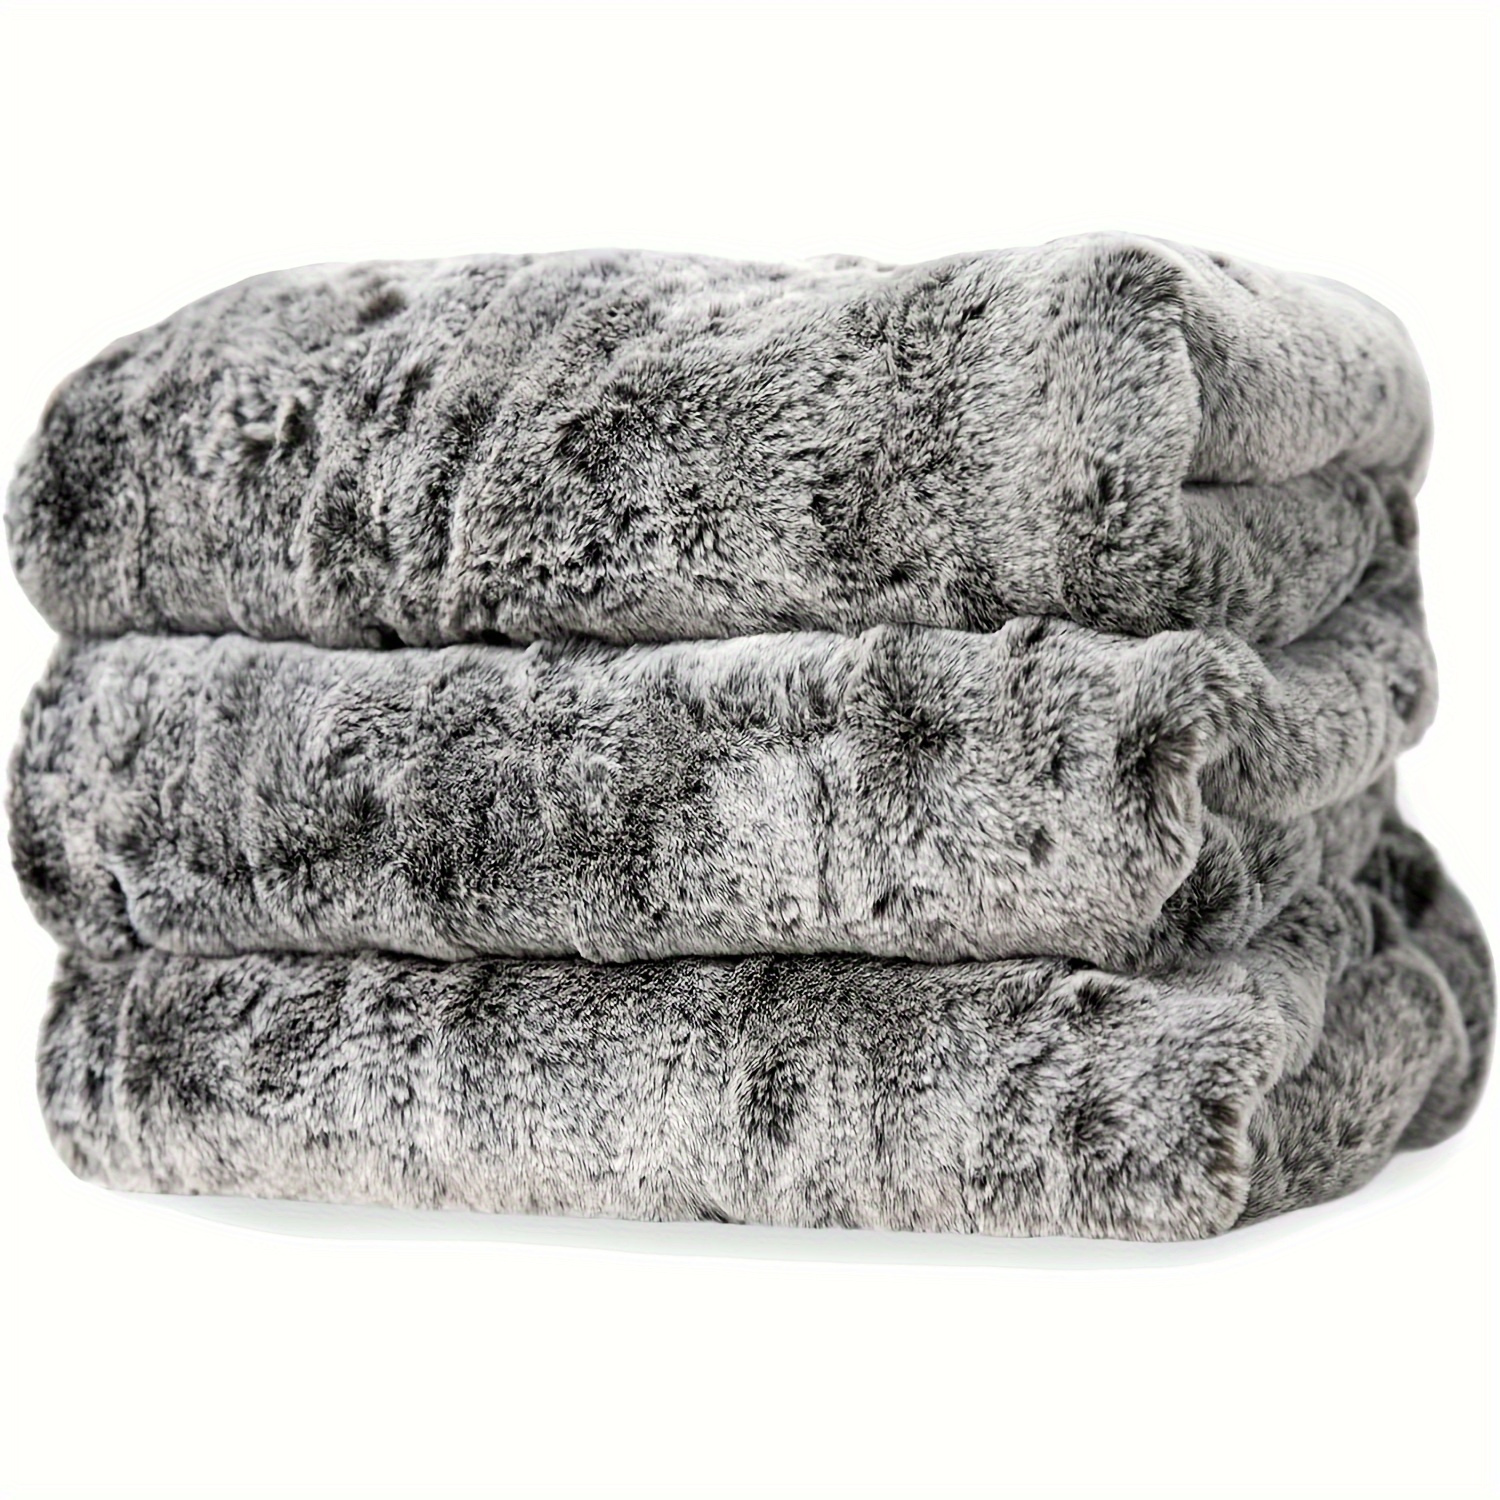 

Extra Soft Fuzzy Faux Fur Blanket Throw Size 50x70 Inches, Reversible Luxury Cozy Fluffy Fuzzy, Home Decor Soft Luxurious Comfy Blankets For Couch-super Soft Cozy